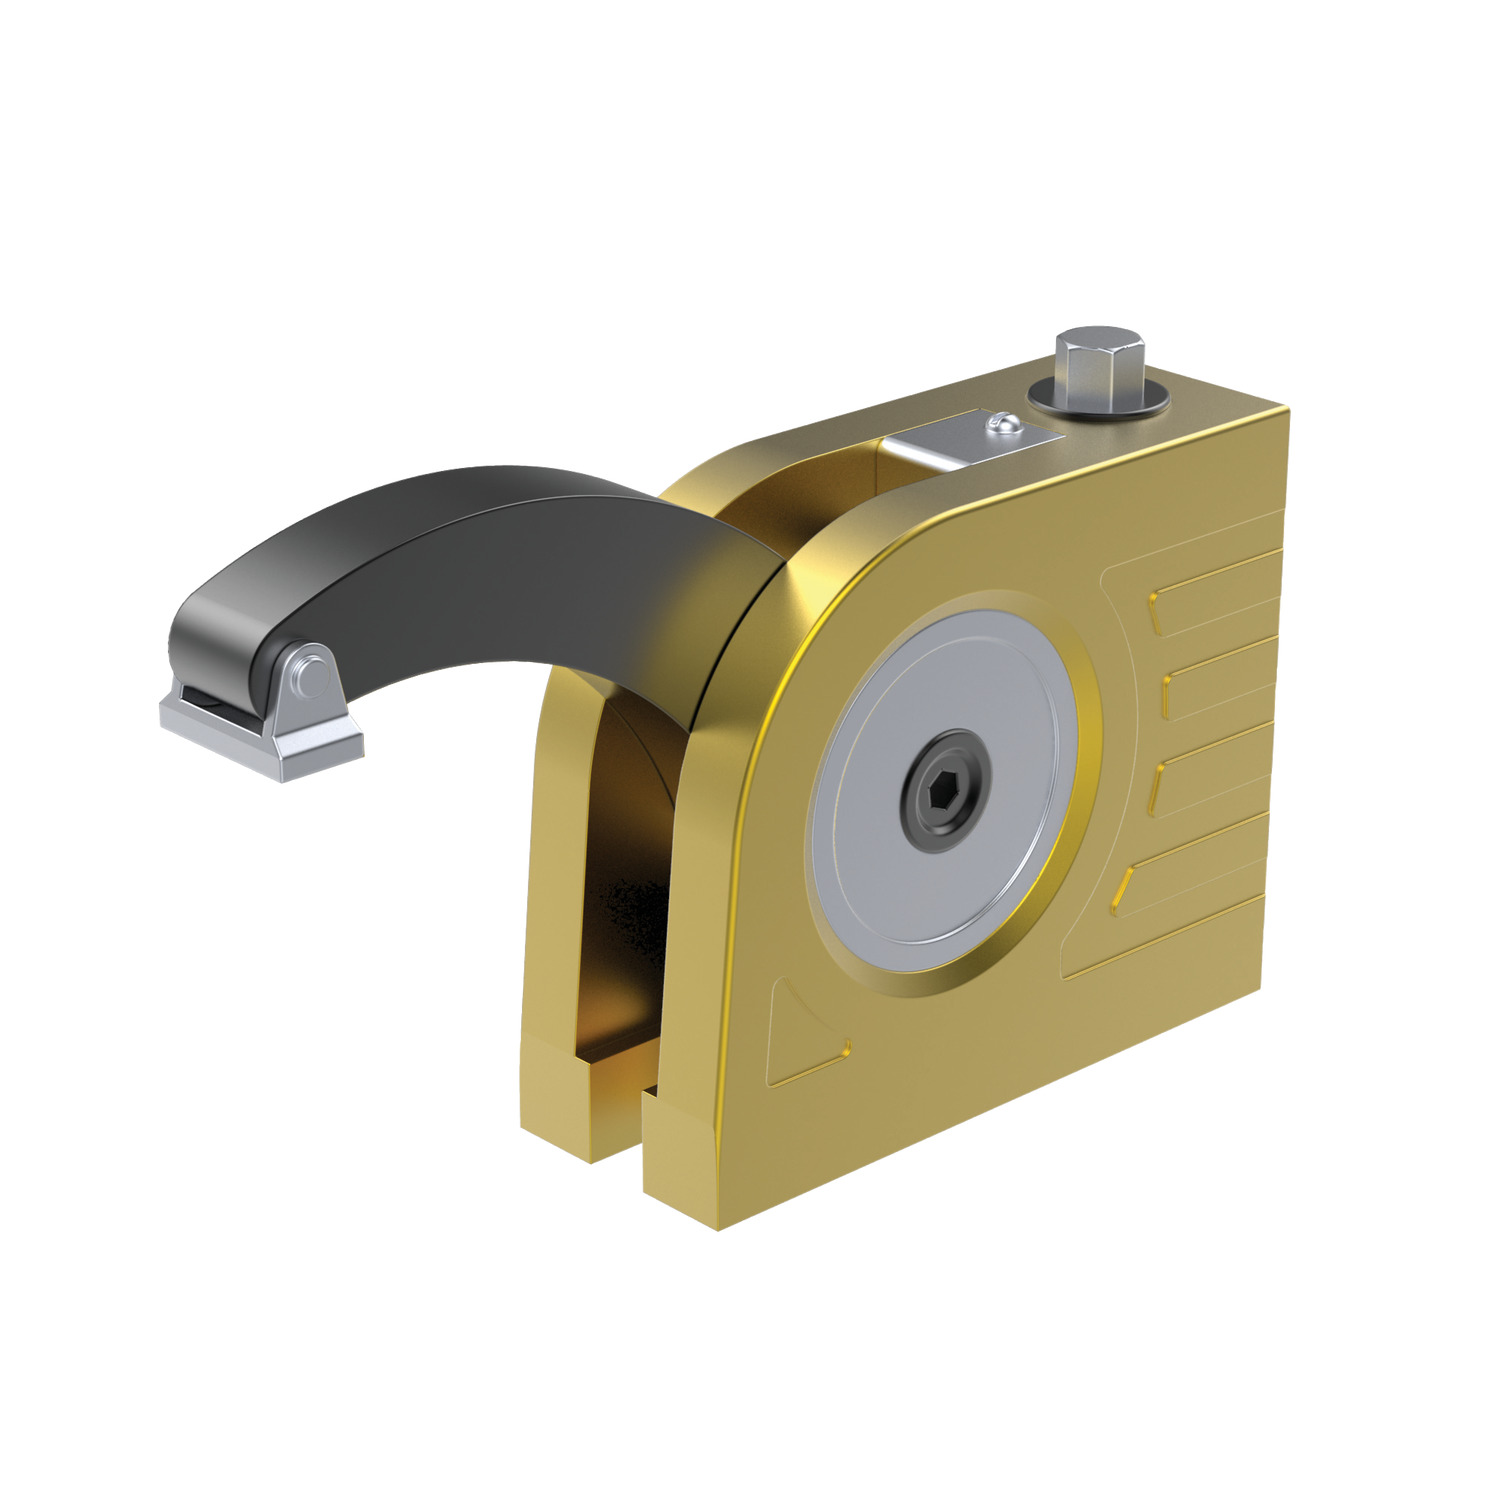 10650.W0035 Mono Bloc Clamps - Aluminium Extra long 43 to 155 - 132 - R176. With Clamping Key.